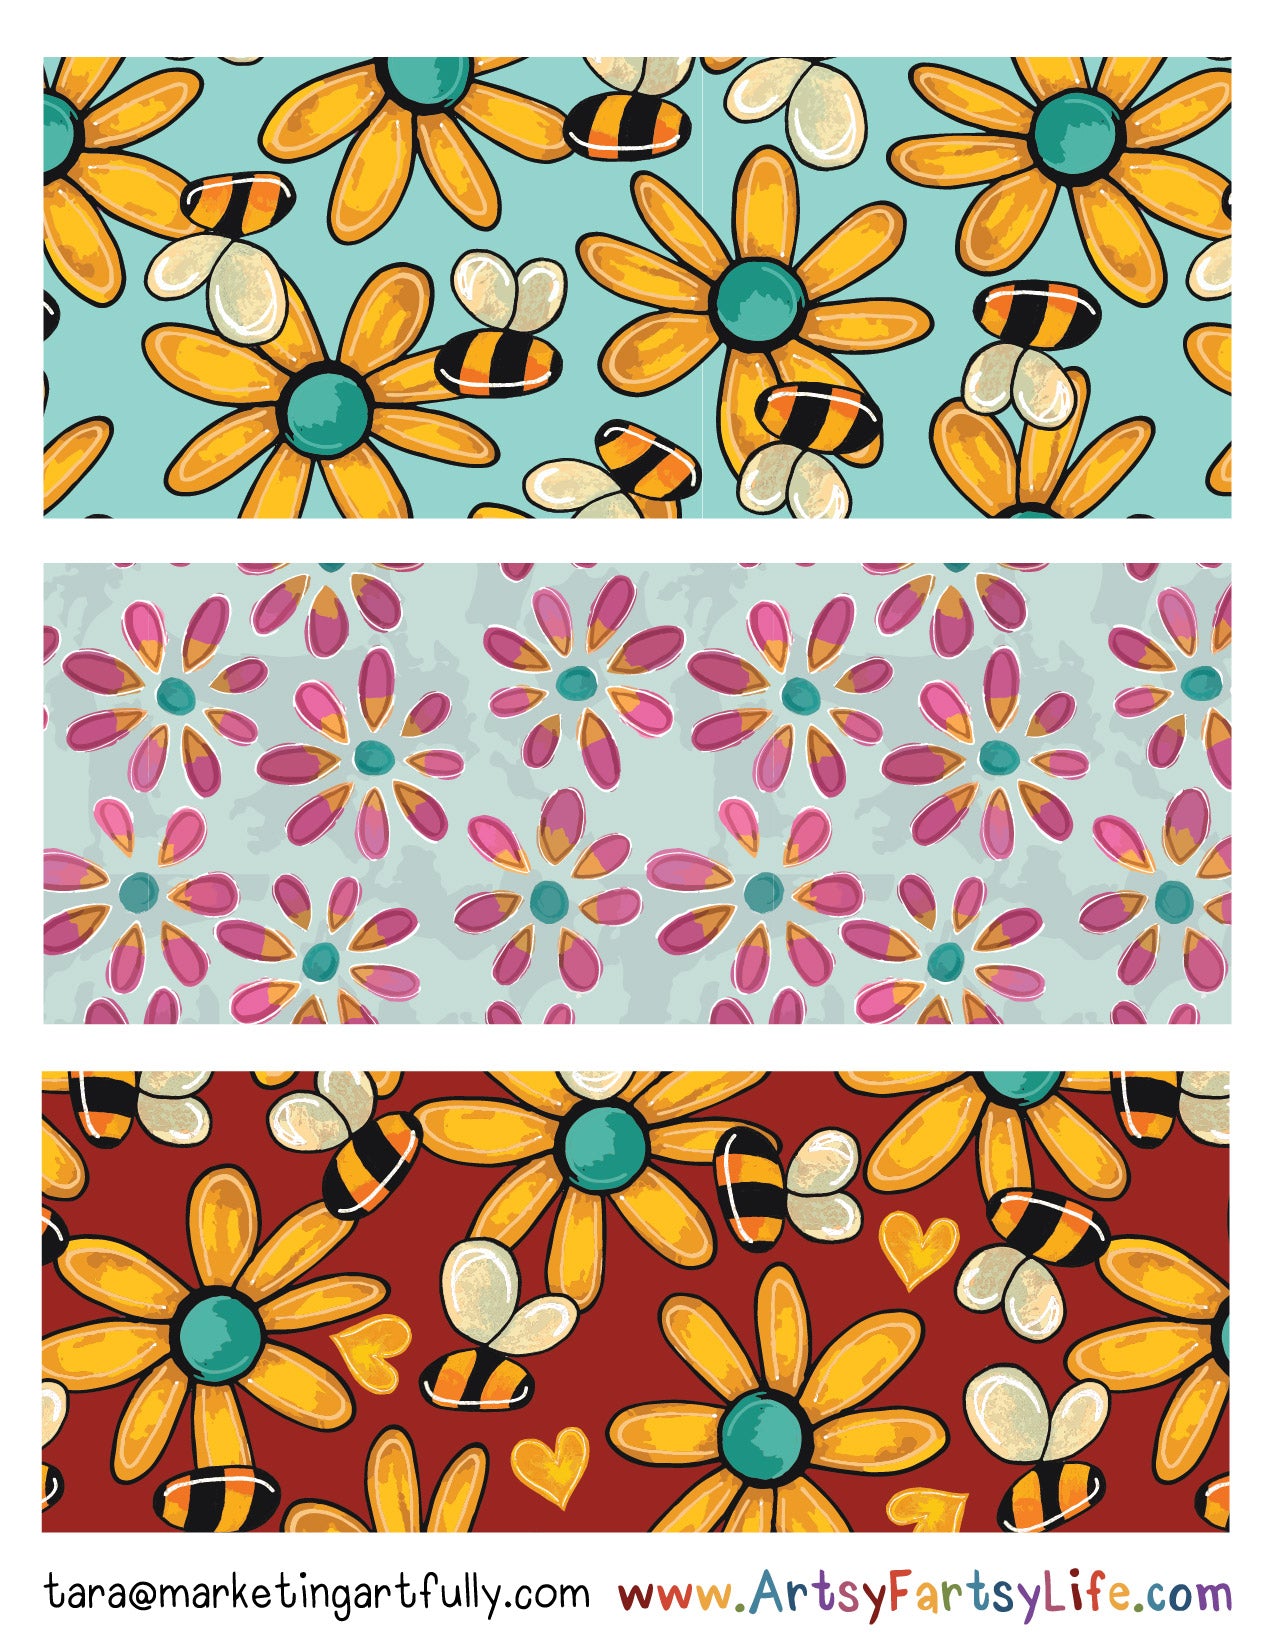 Lady Bee Bear Surface Design for Party Paper